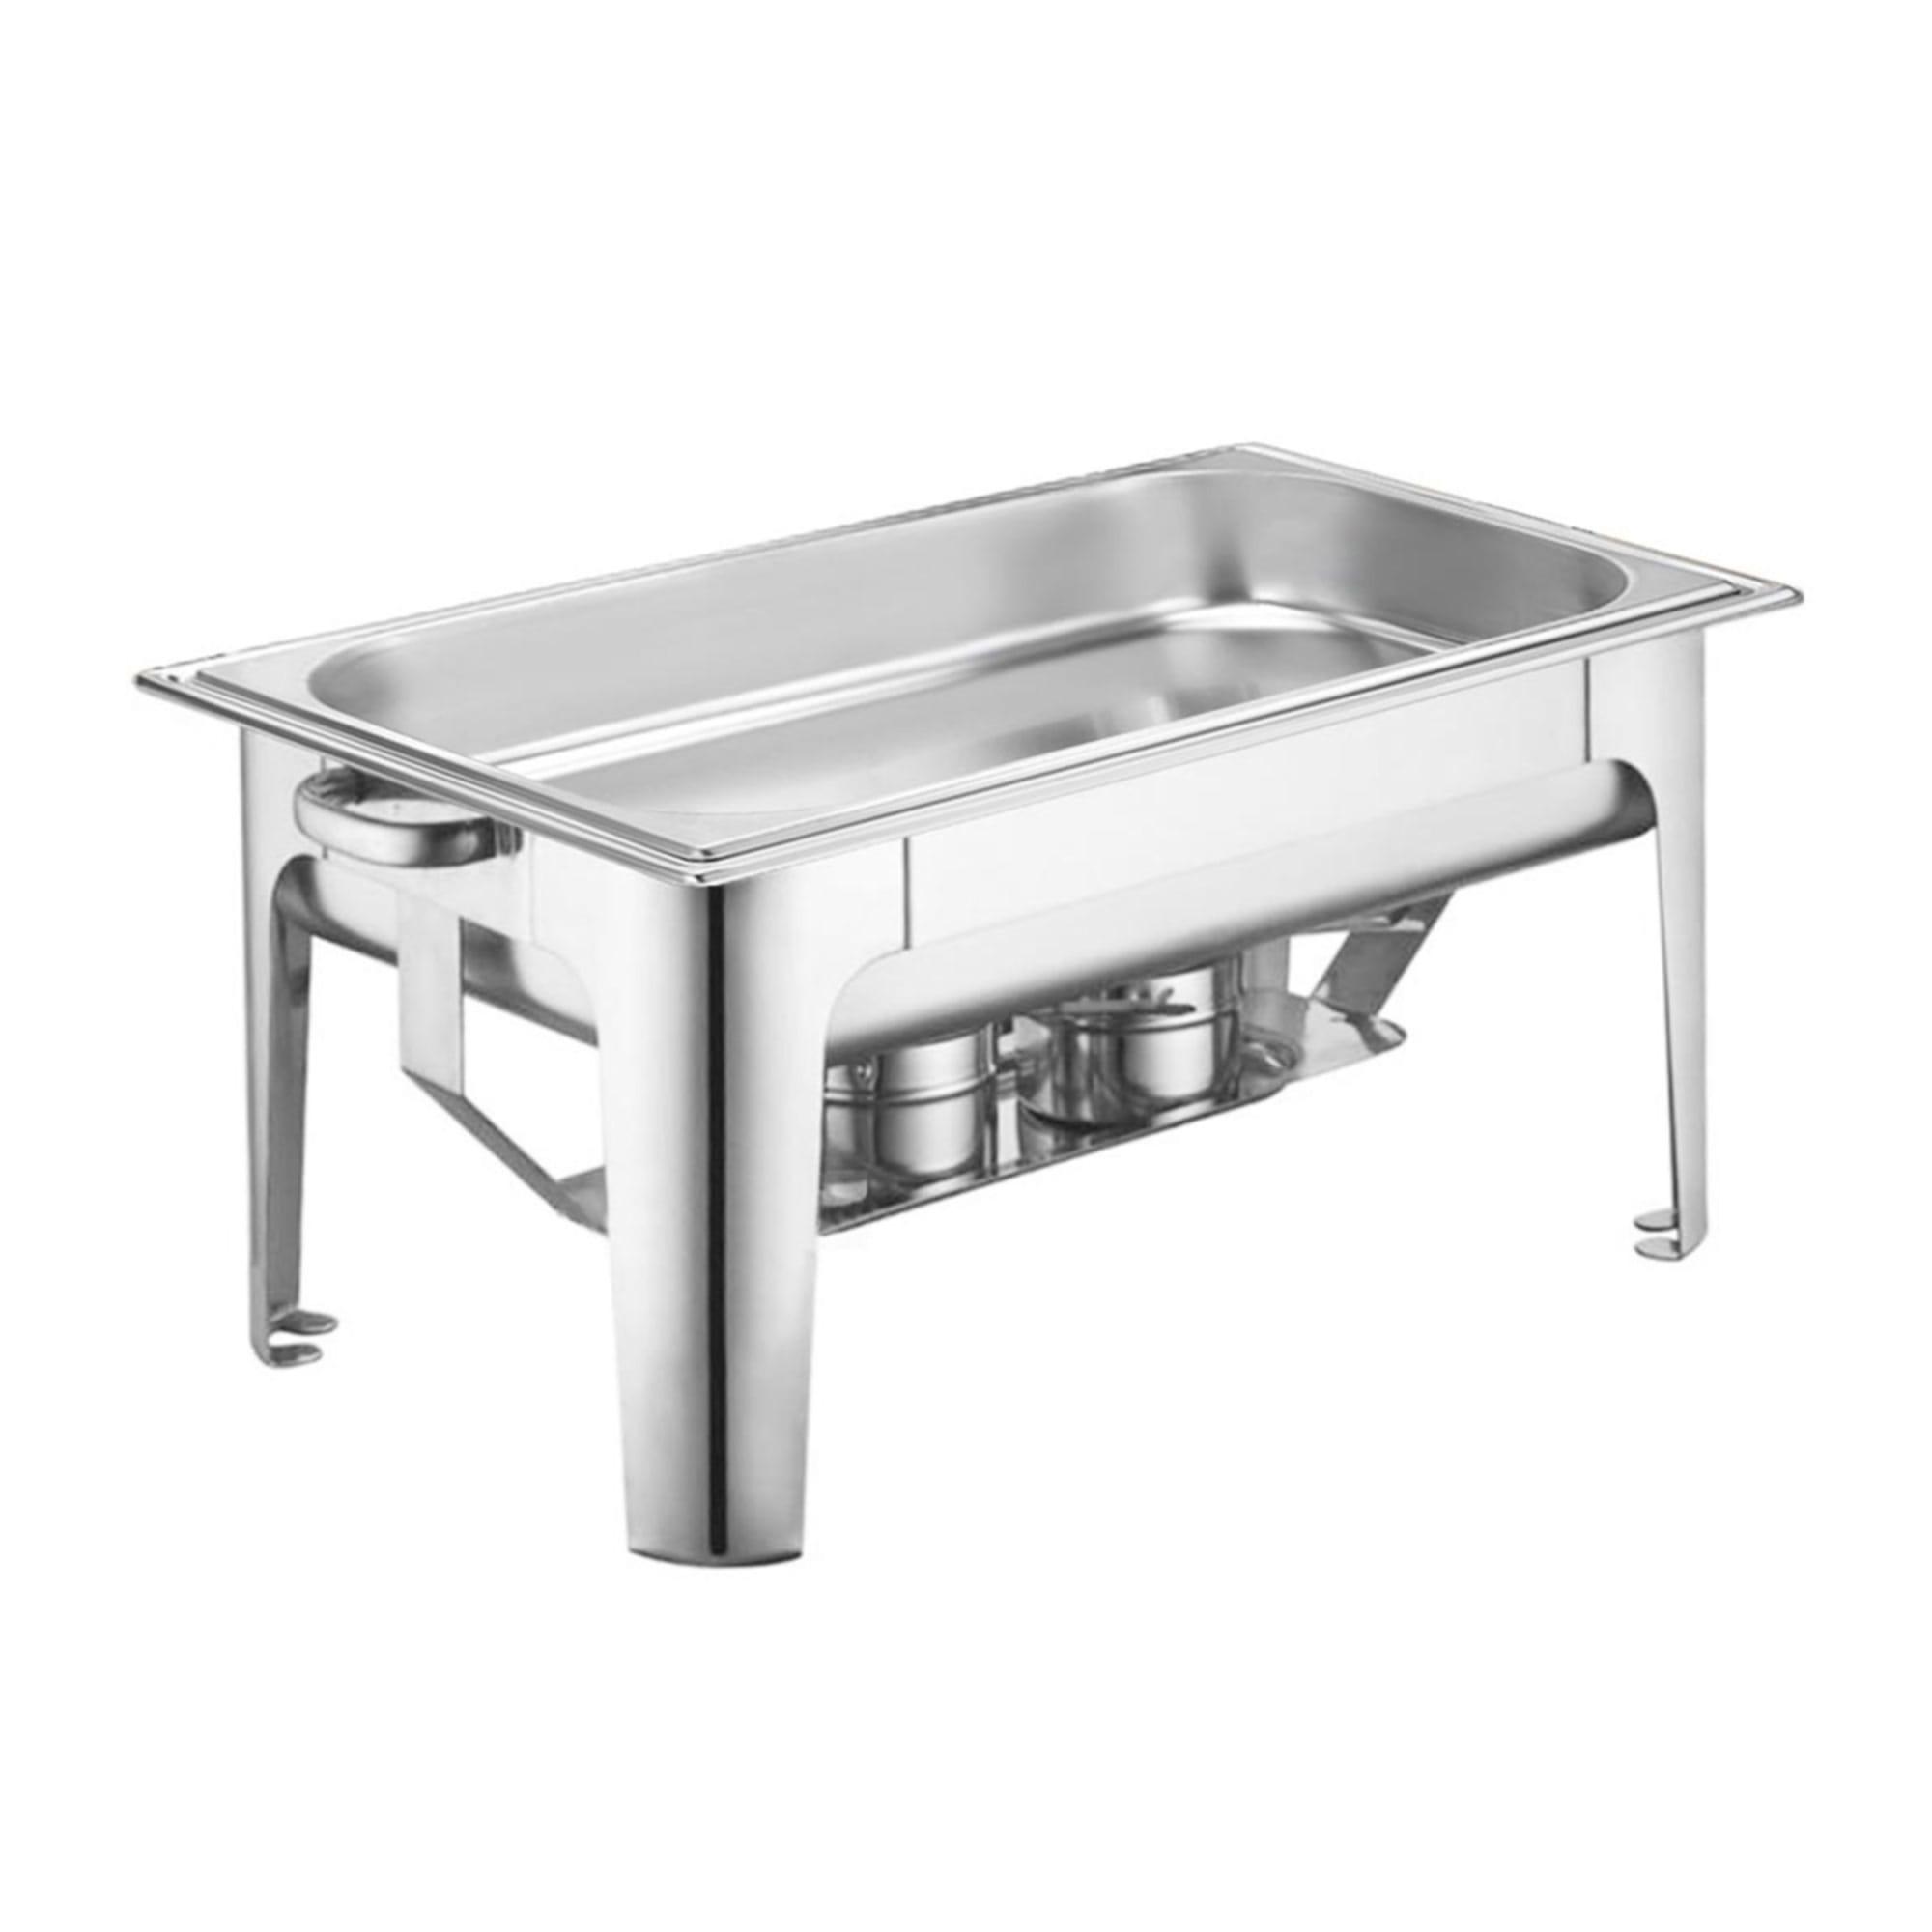 Soga Rectangular Stainless Steel Chafing Dish with Lid Image 2